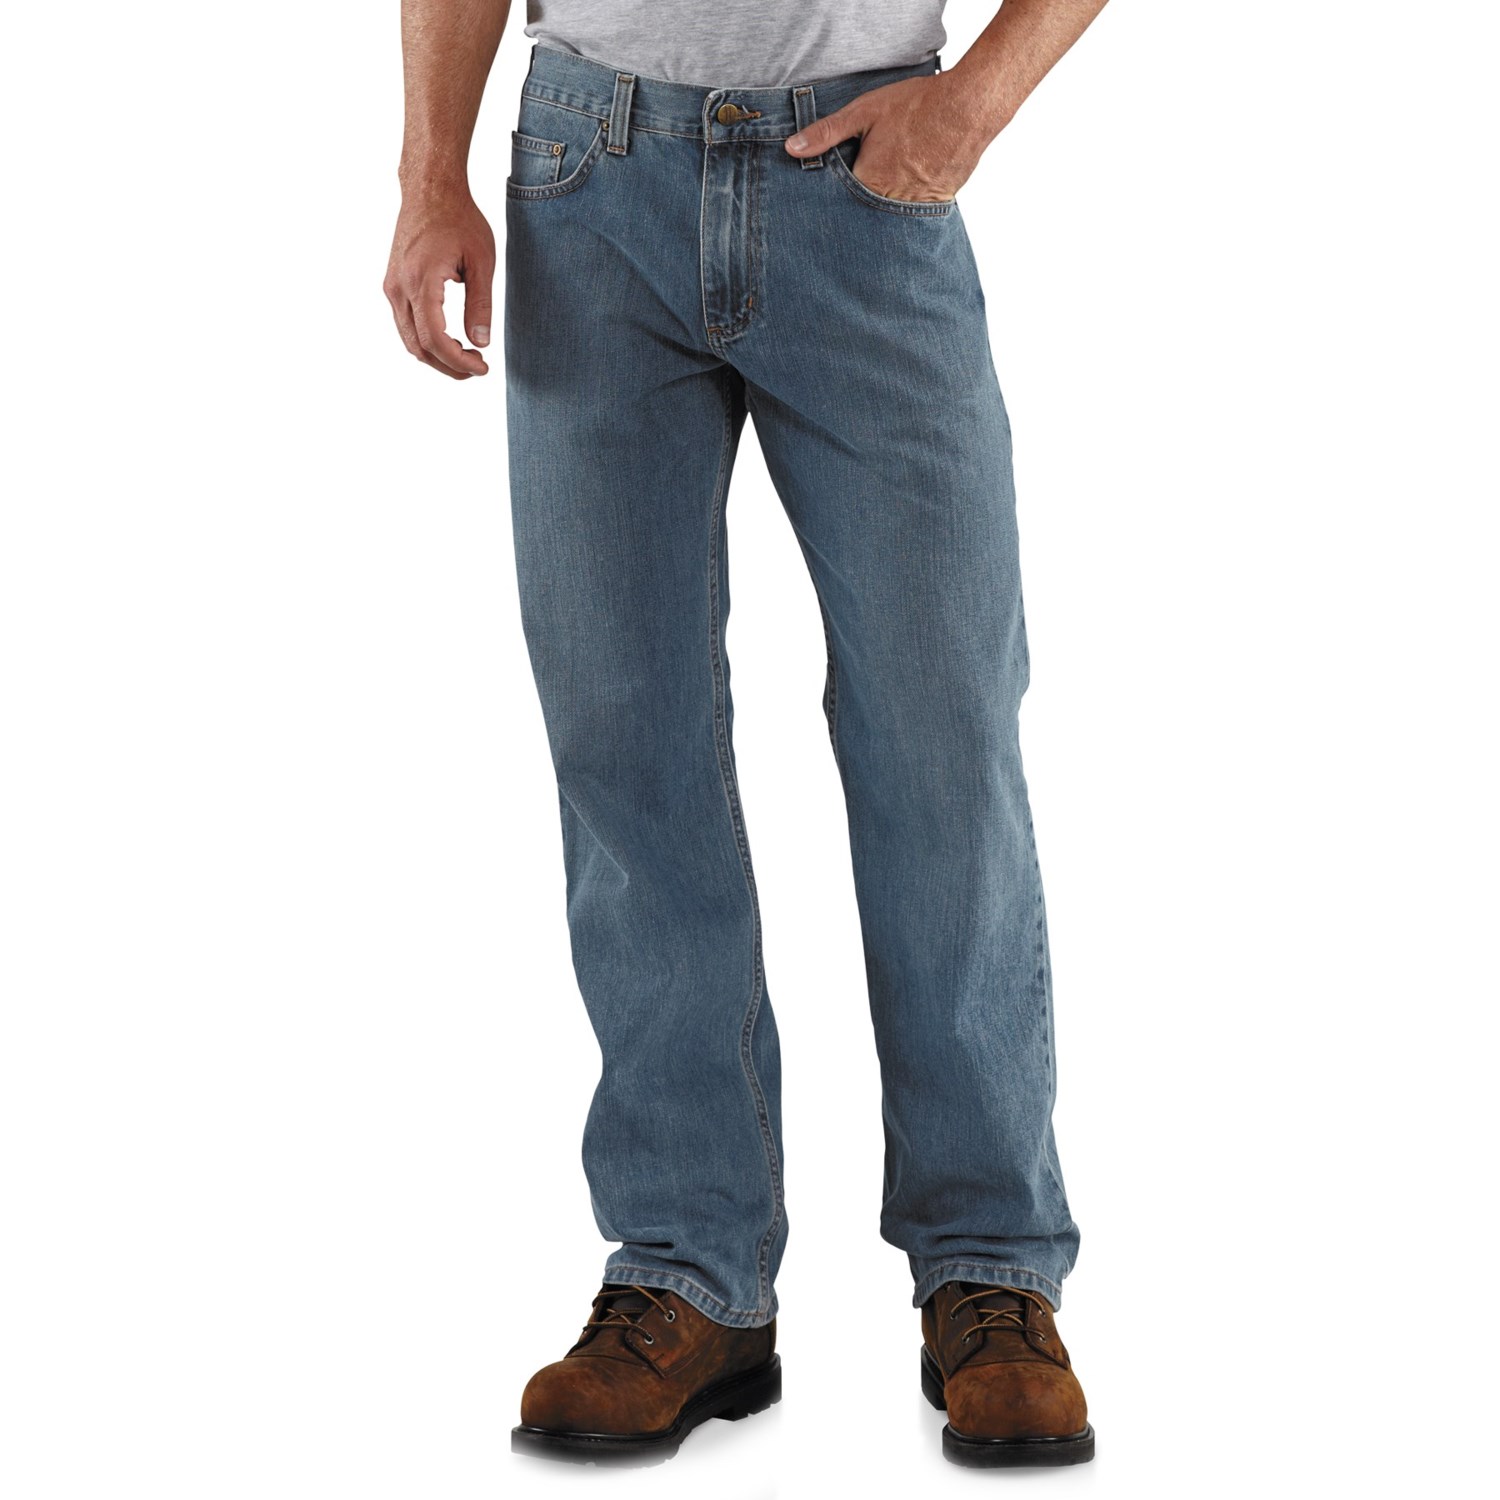 Carhartt Loose Fit Jeans (For Men)